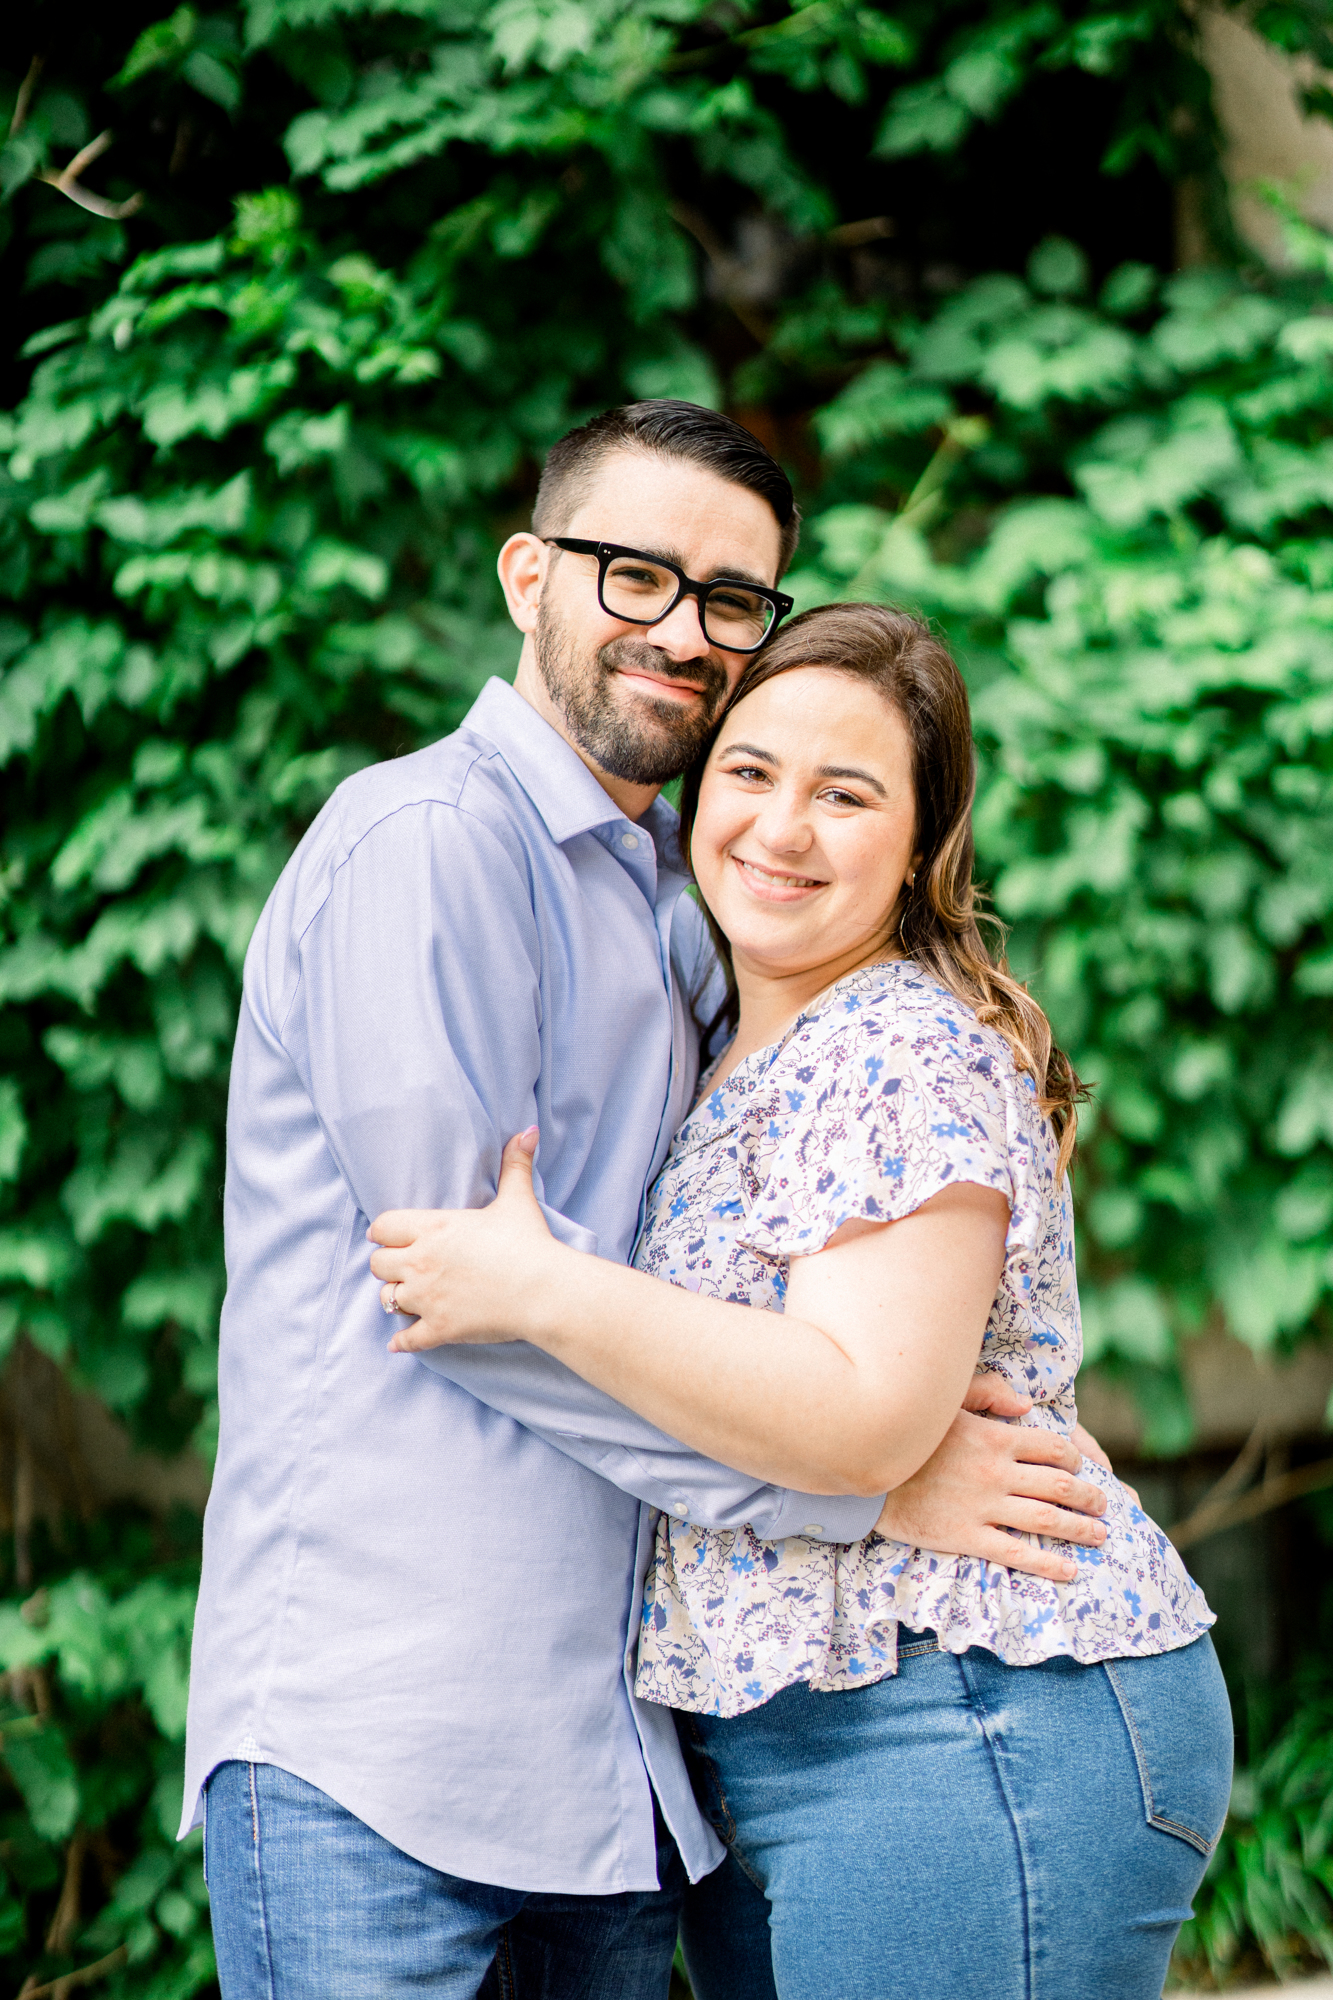 Sweet Engagement Photos with a Professional Engagement Photographer